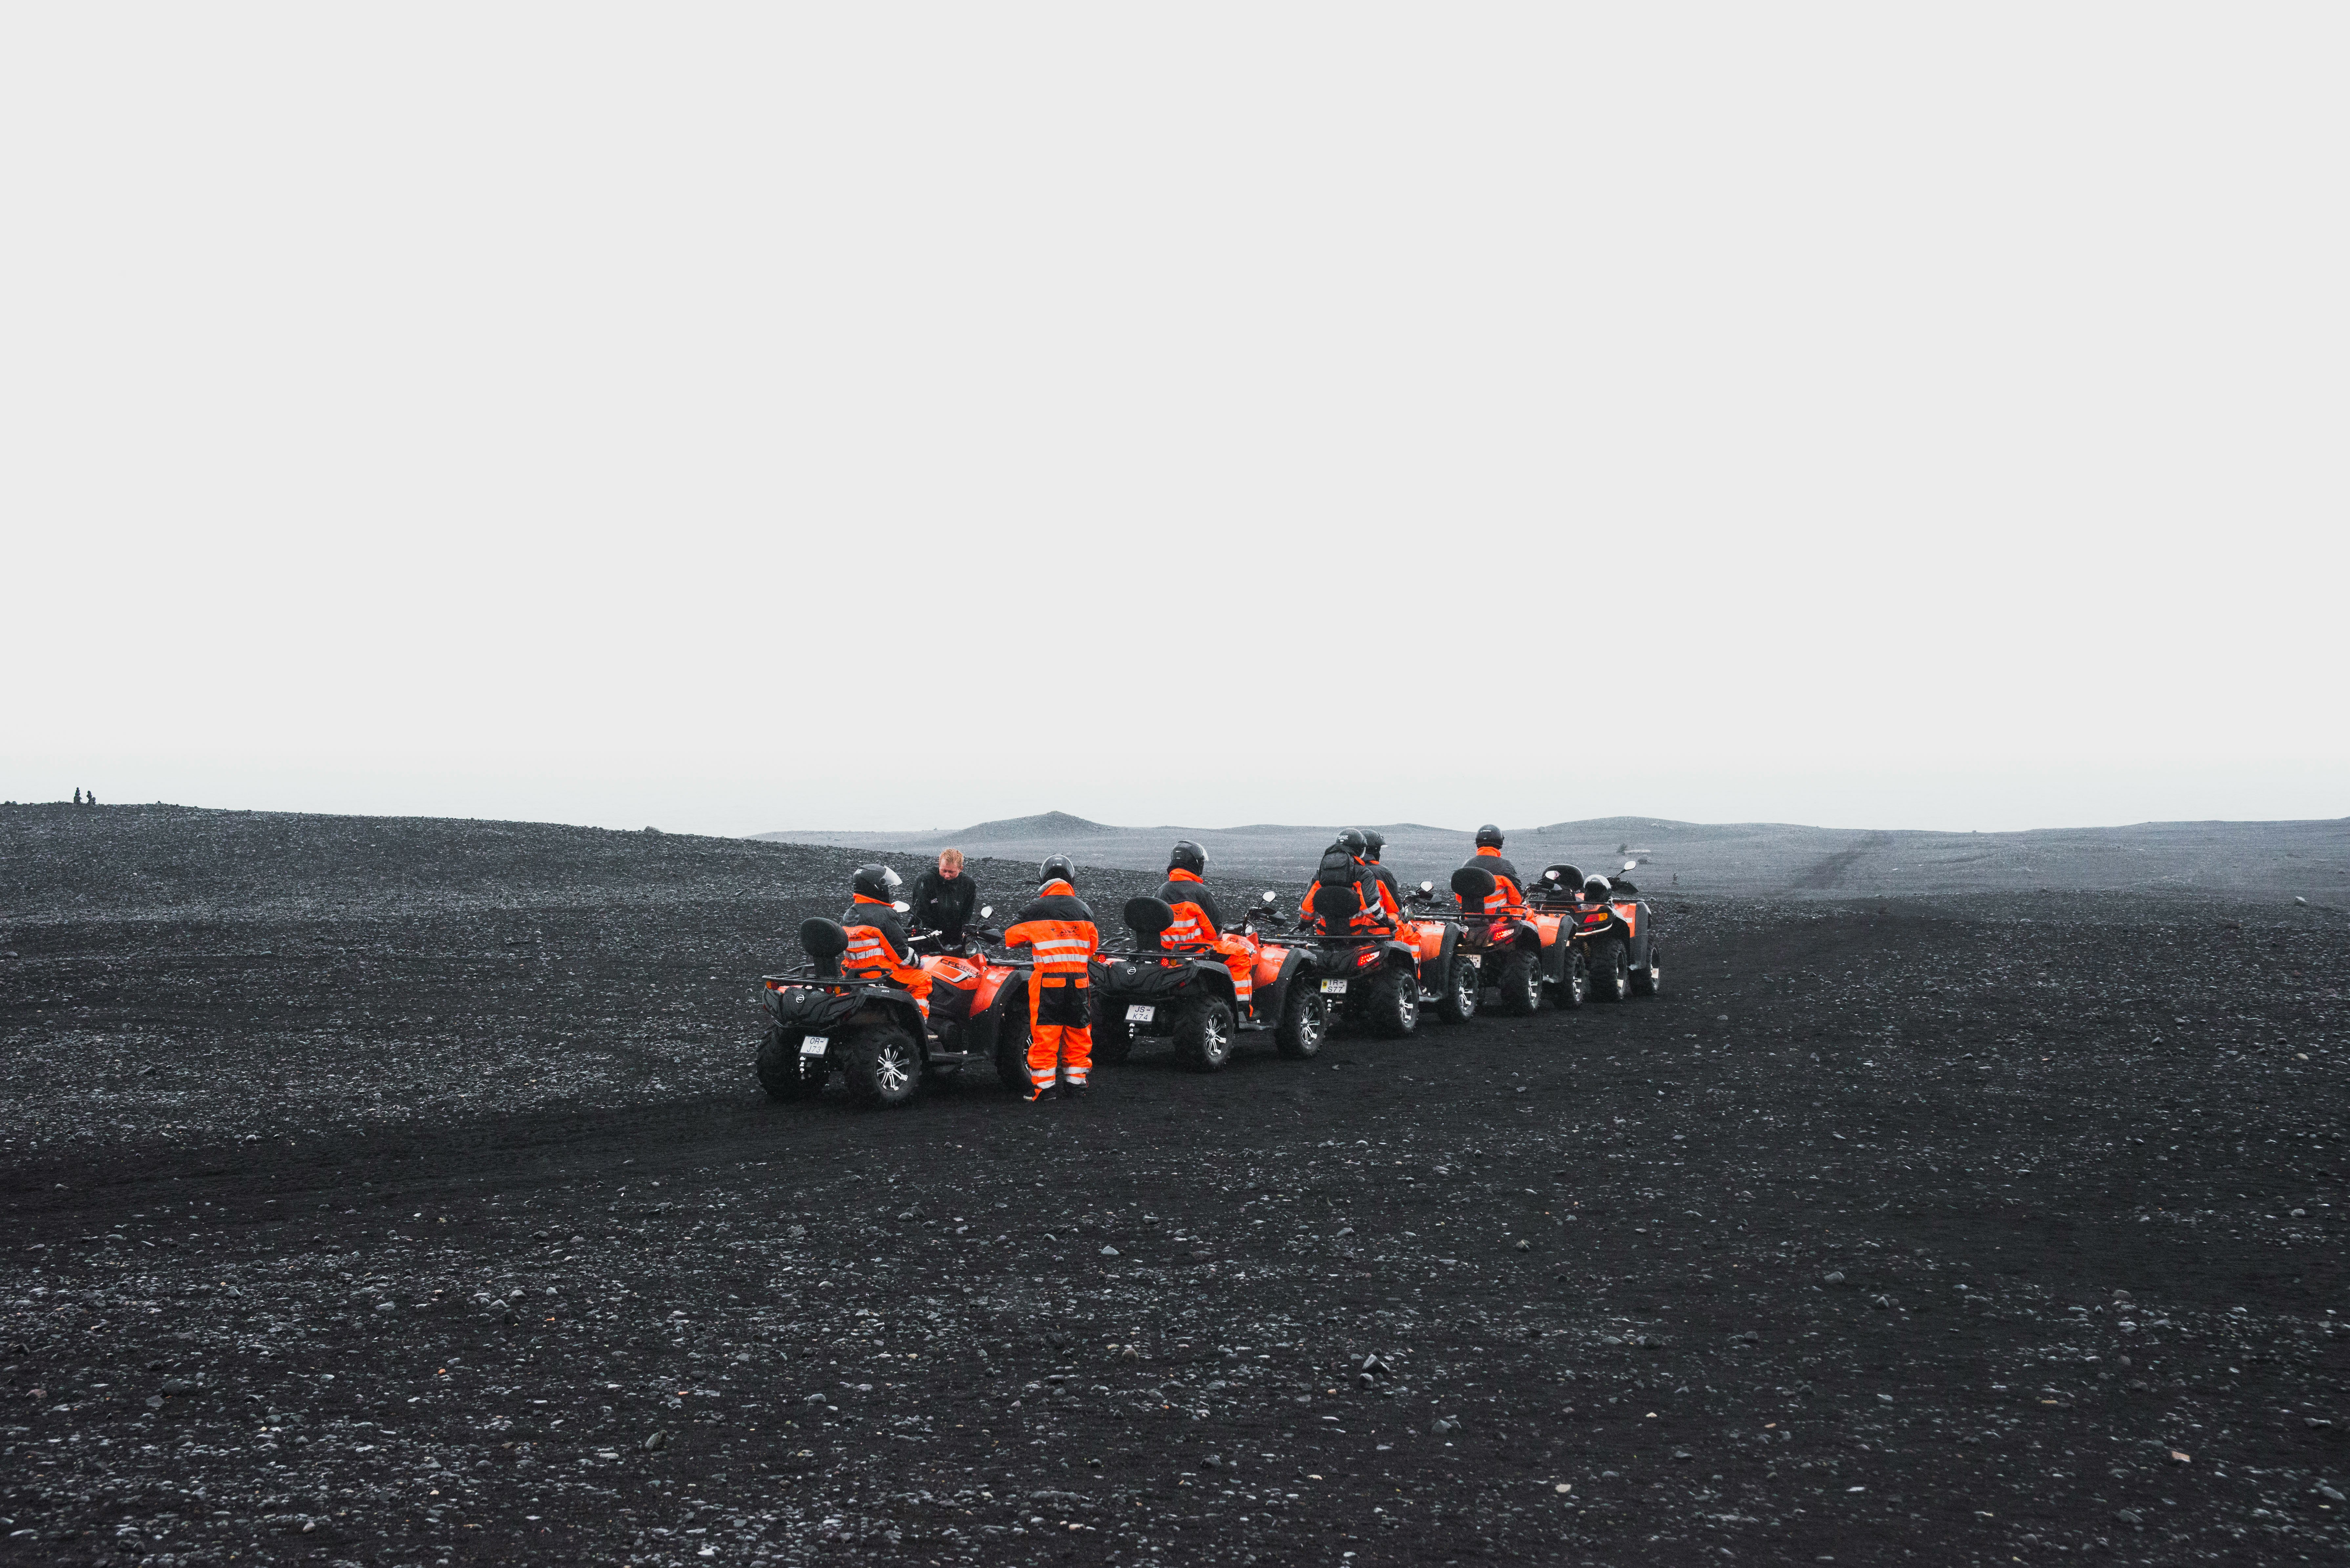 group of people in orange suit riding a ATV